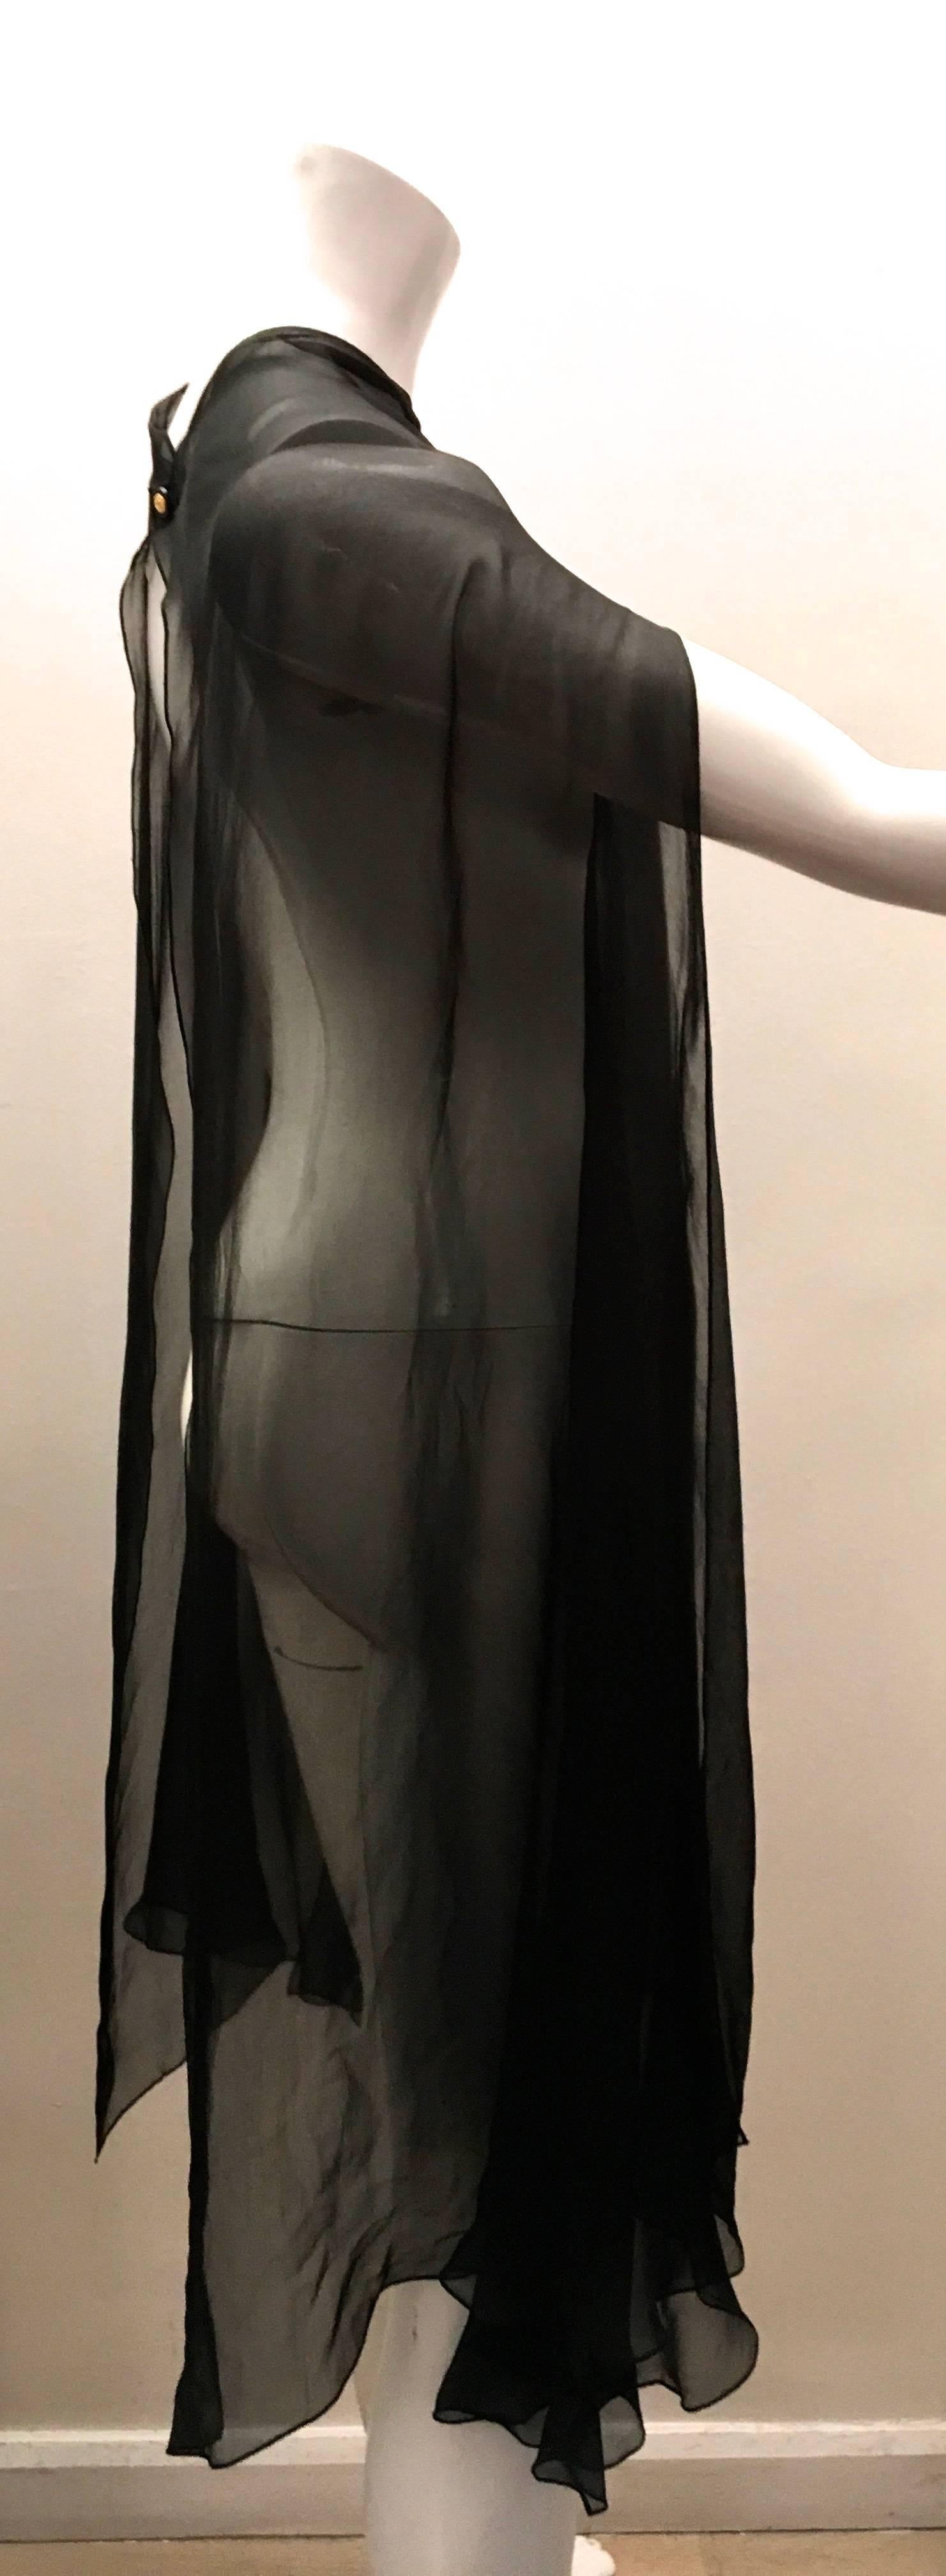 Presented here is a magnificent sheer cape from Chanel. This gorgeous cape is made from a fine 100% silk that feels absolutely magnificent. The cape can be worn as a sheer cover for a large ensemble or it can be used with a smaller garment